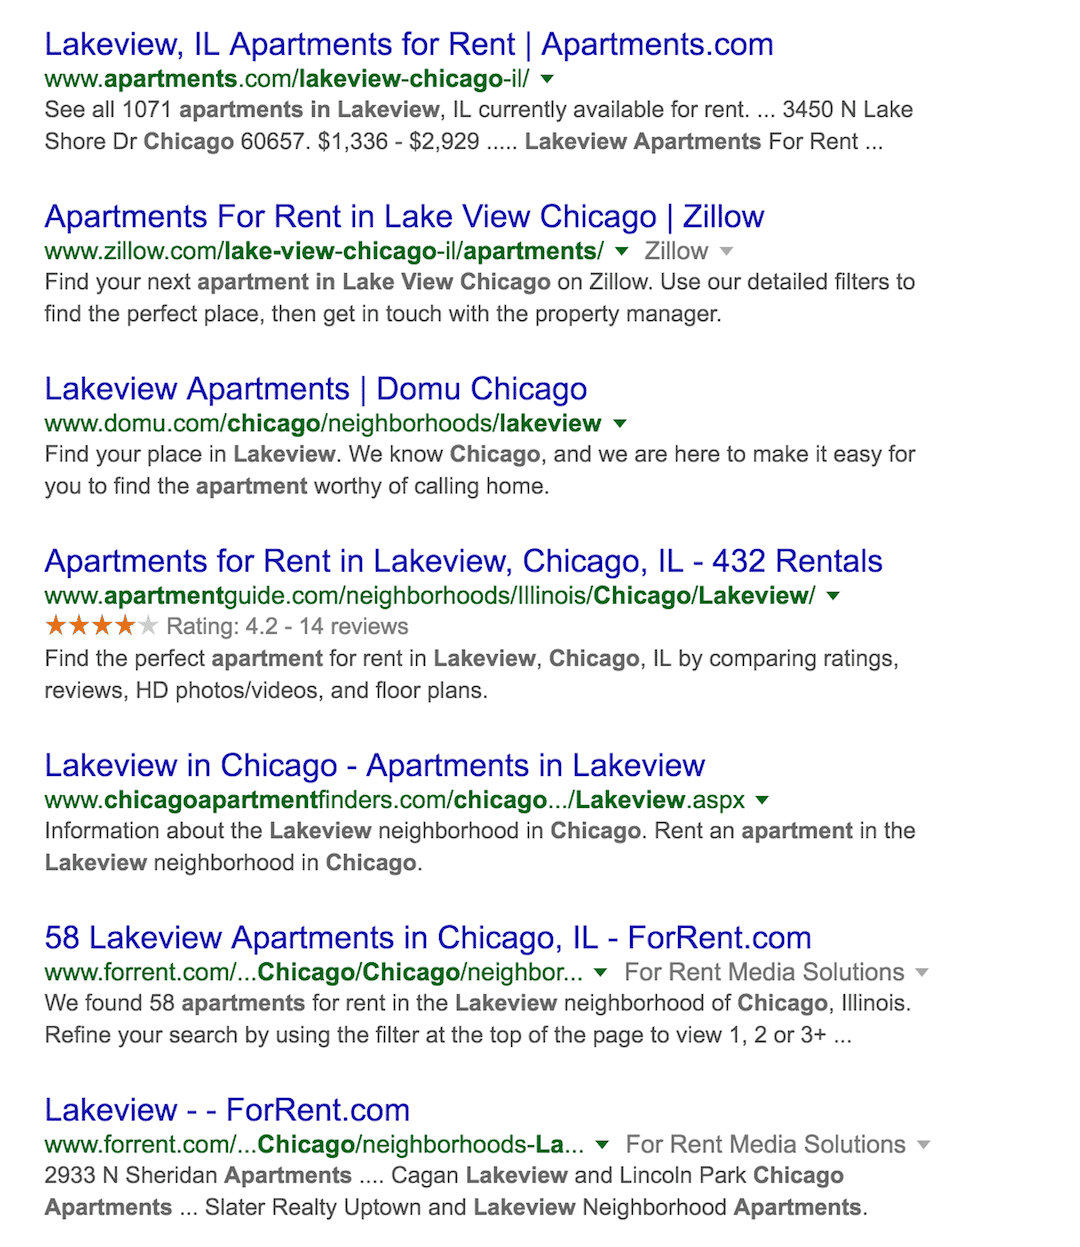 Organic search results for "Apartments in Lakeview"